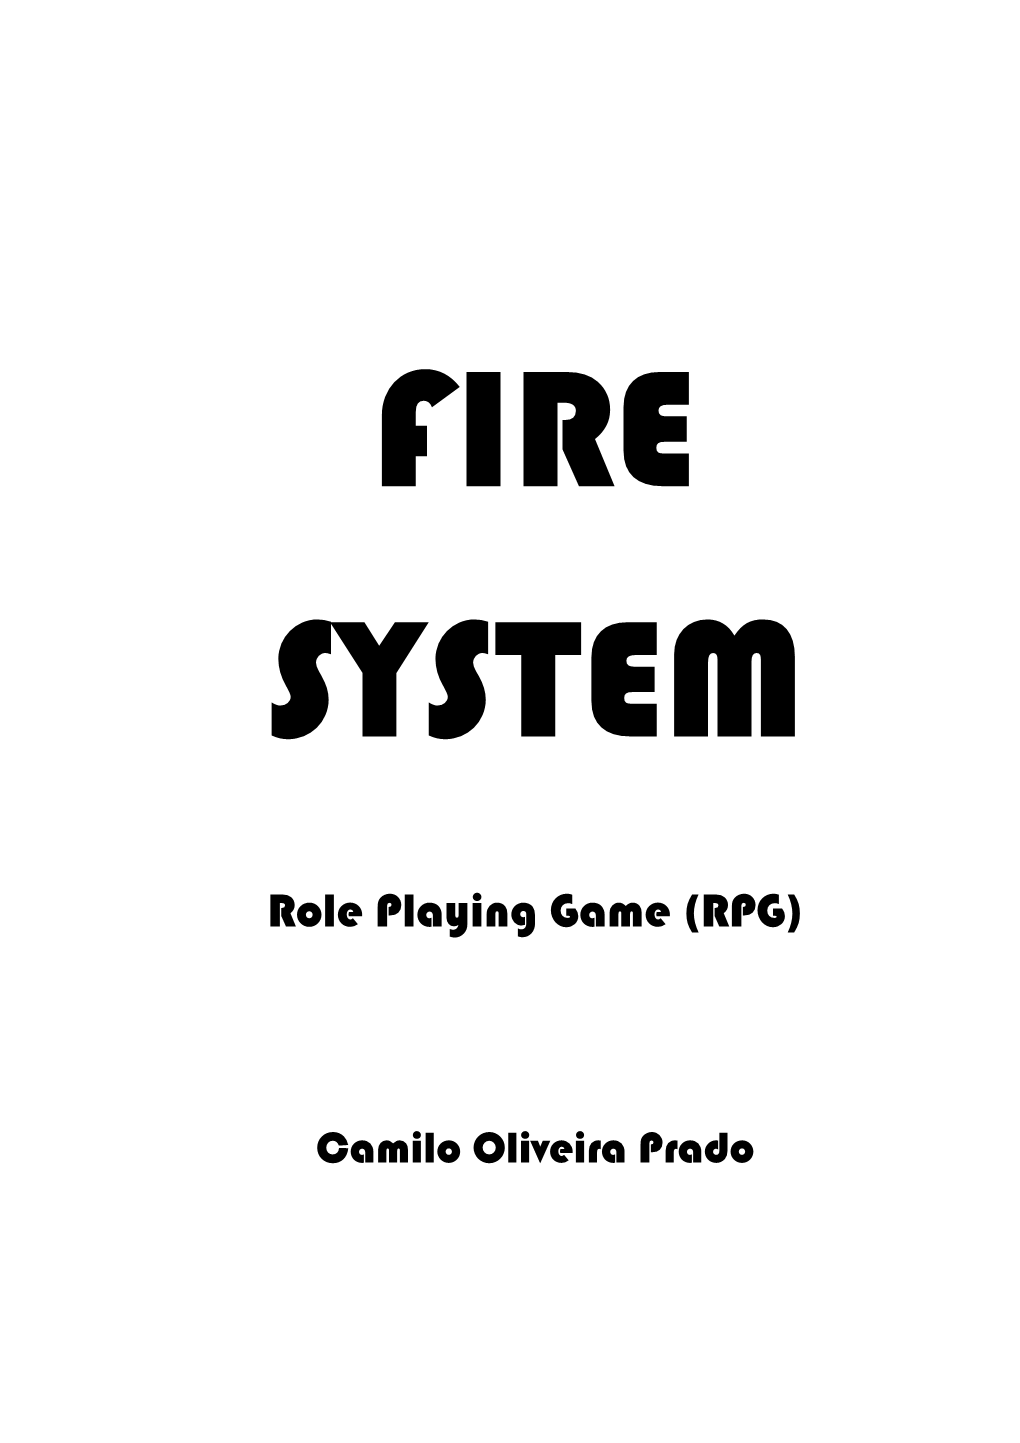 Role Playing Game (RPG)